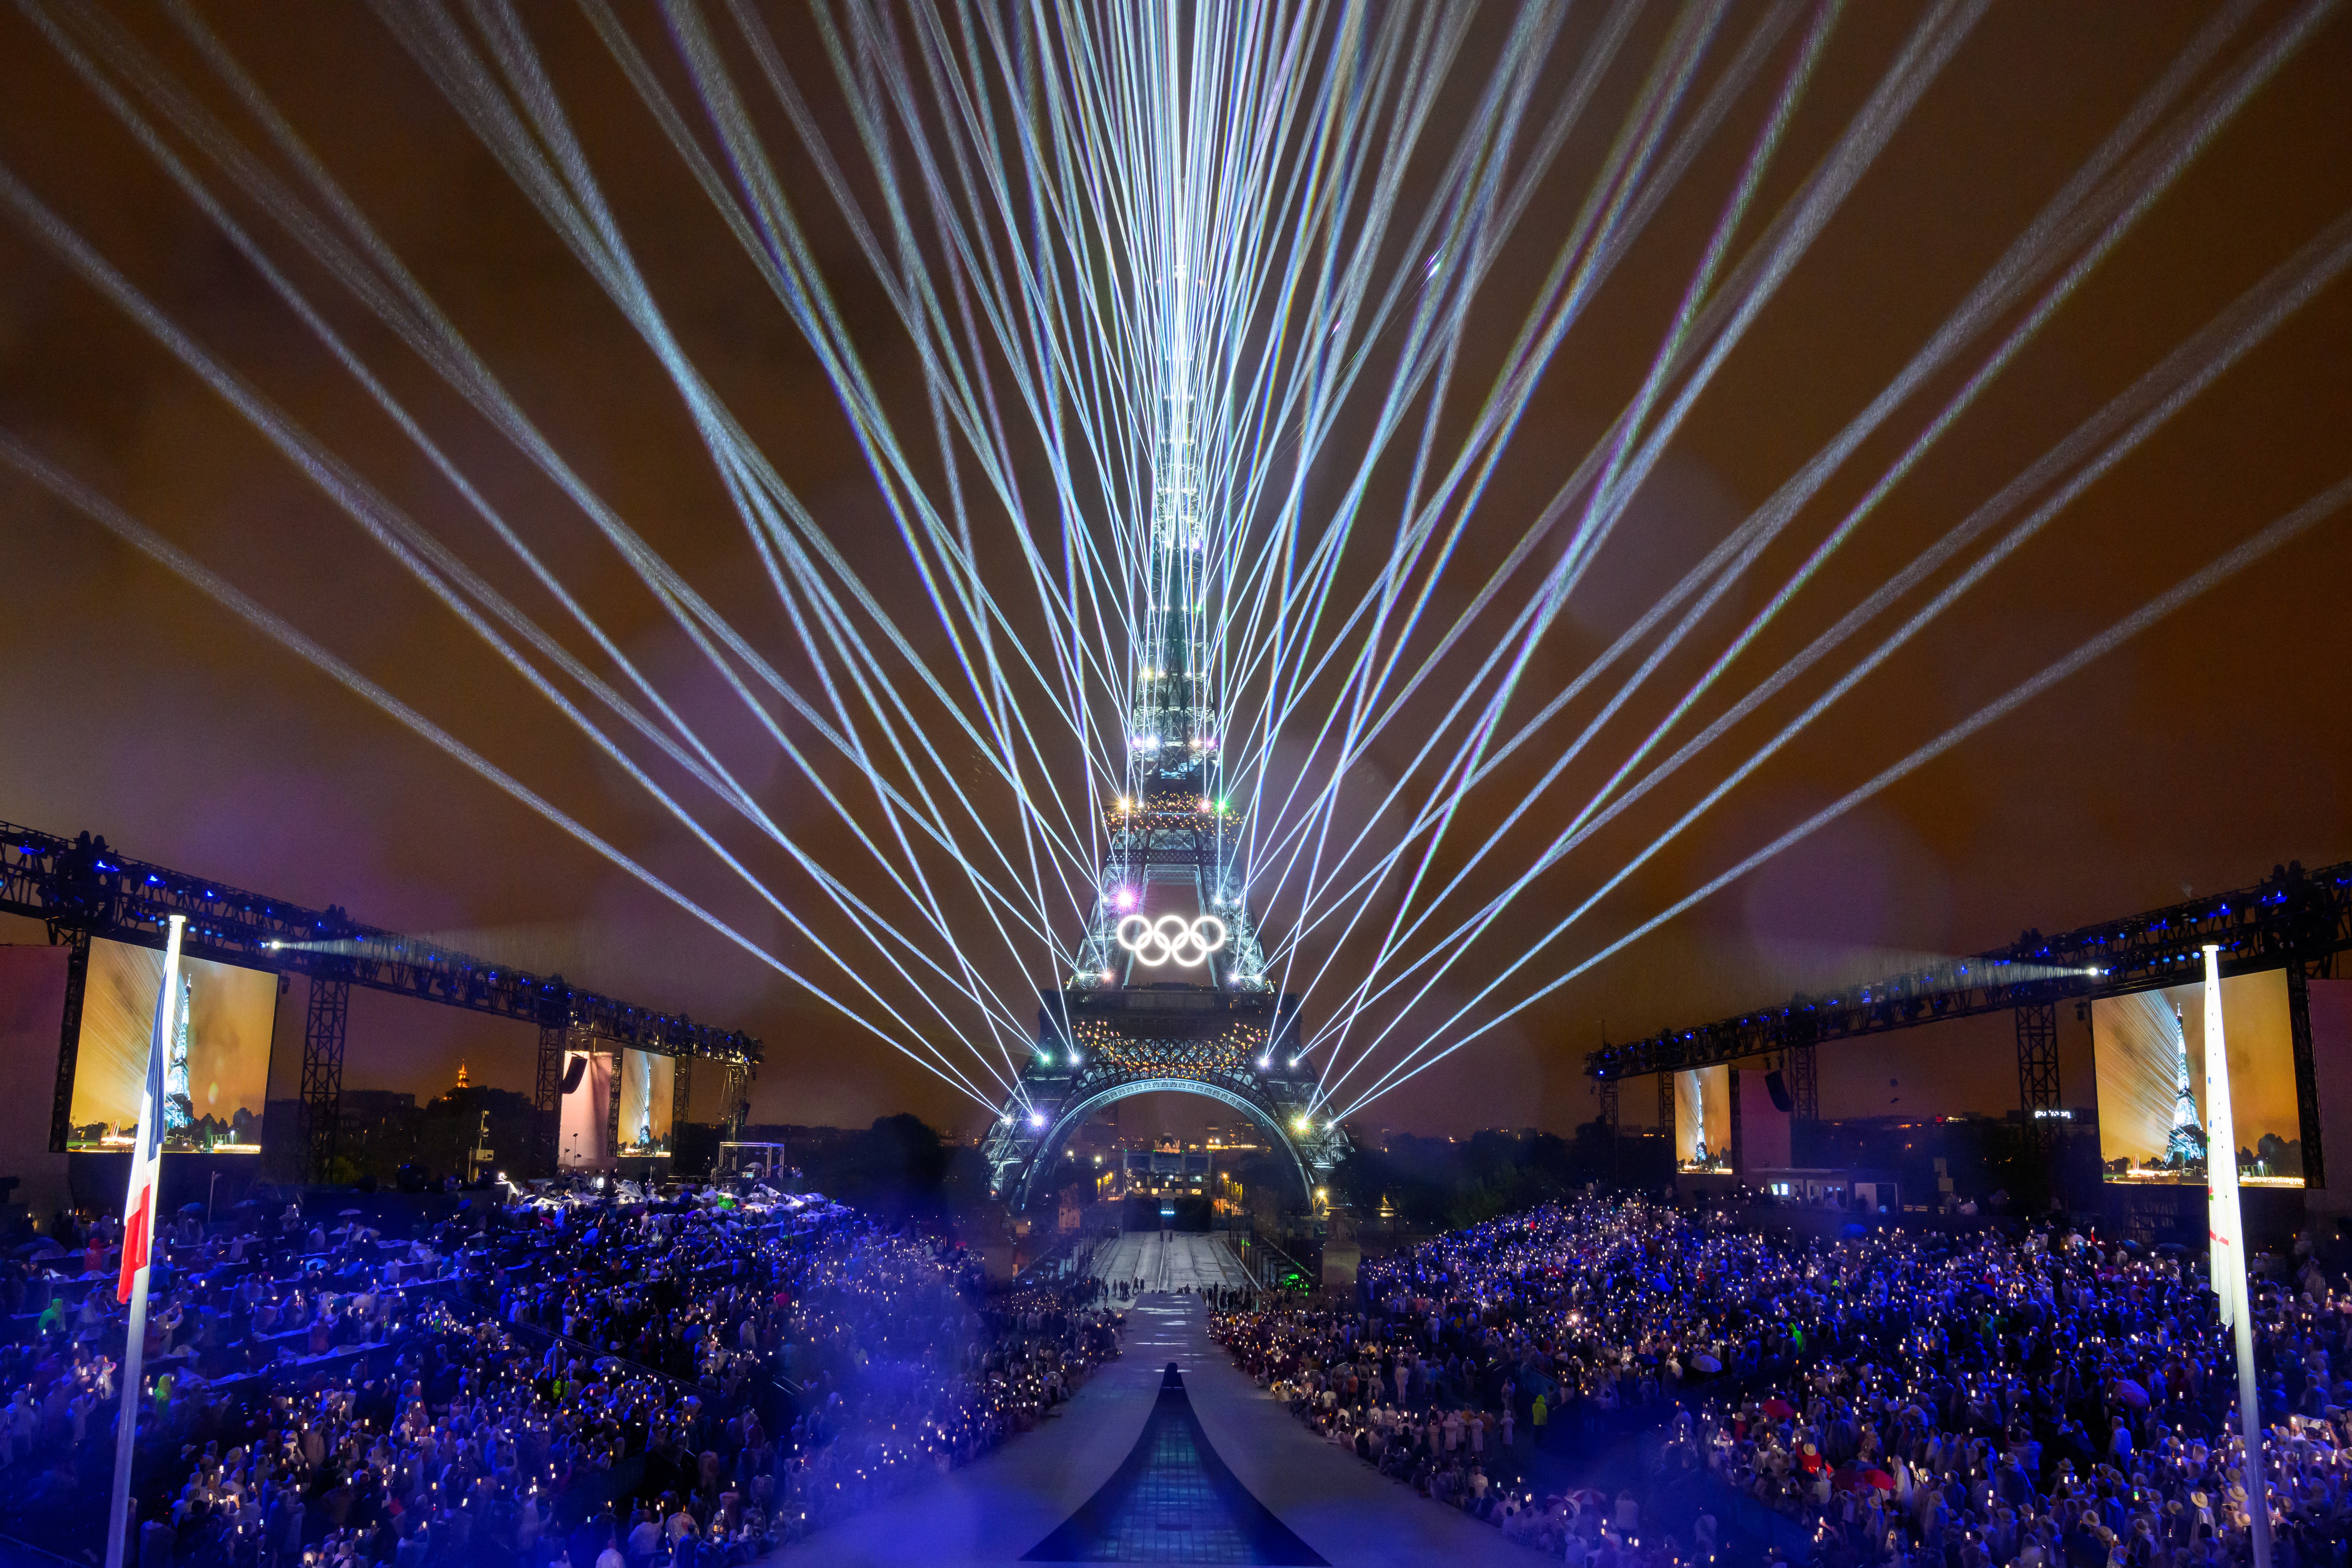 Lasers light up the sky around the Eiffel Tower, watched by a crowd at the Olympics opening ceremony.